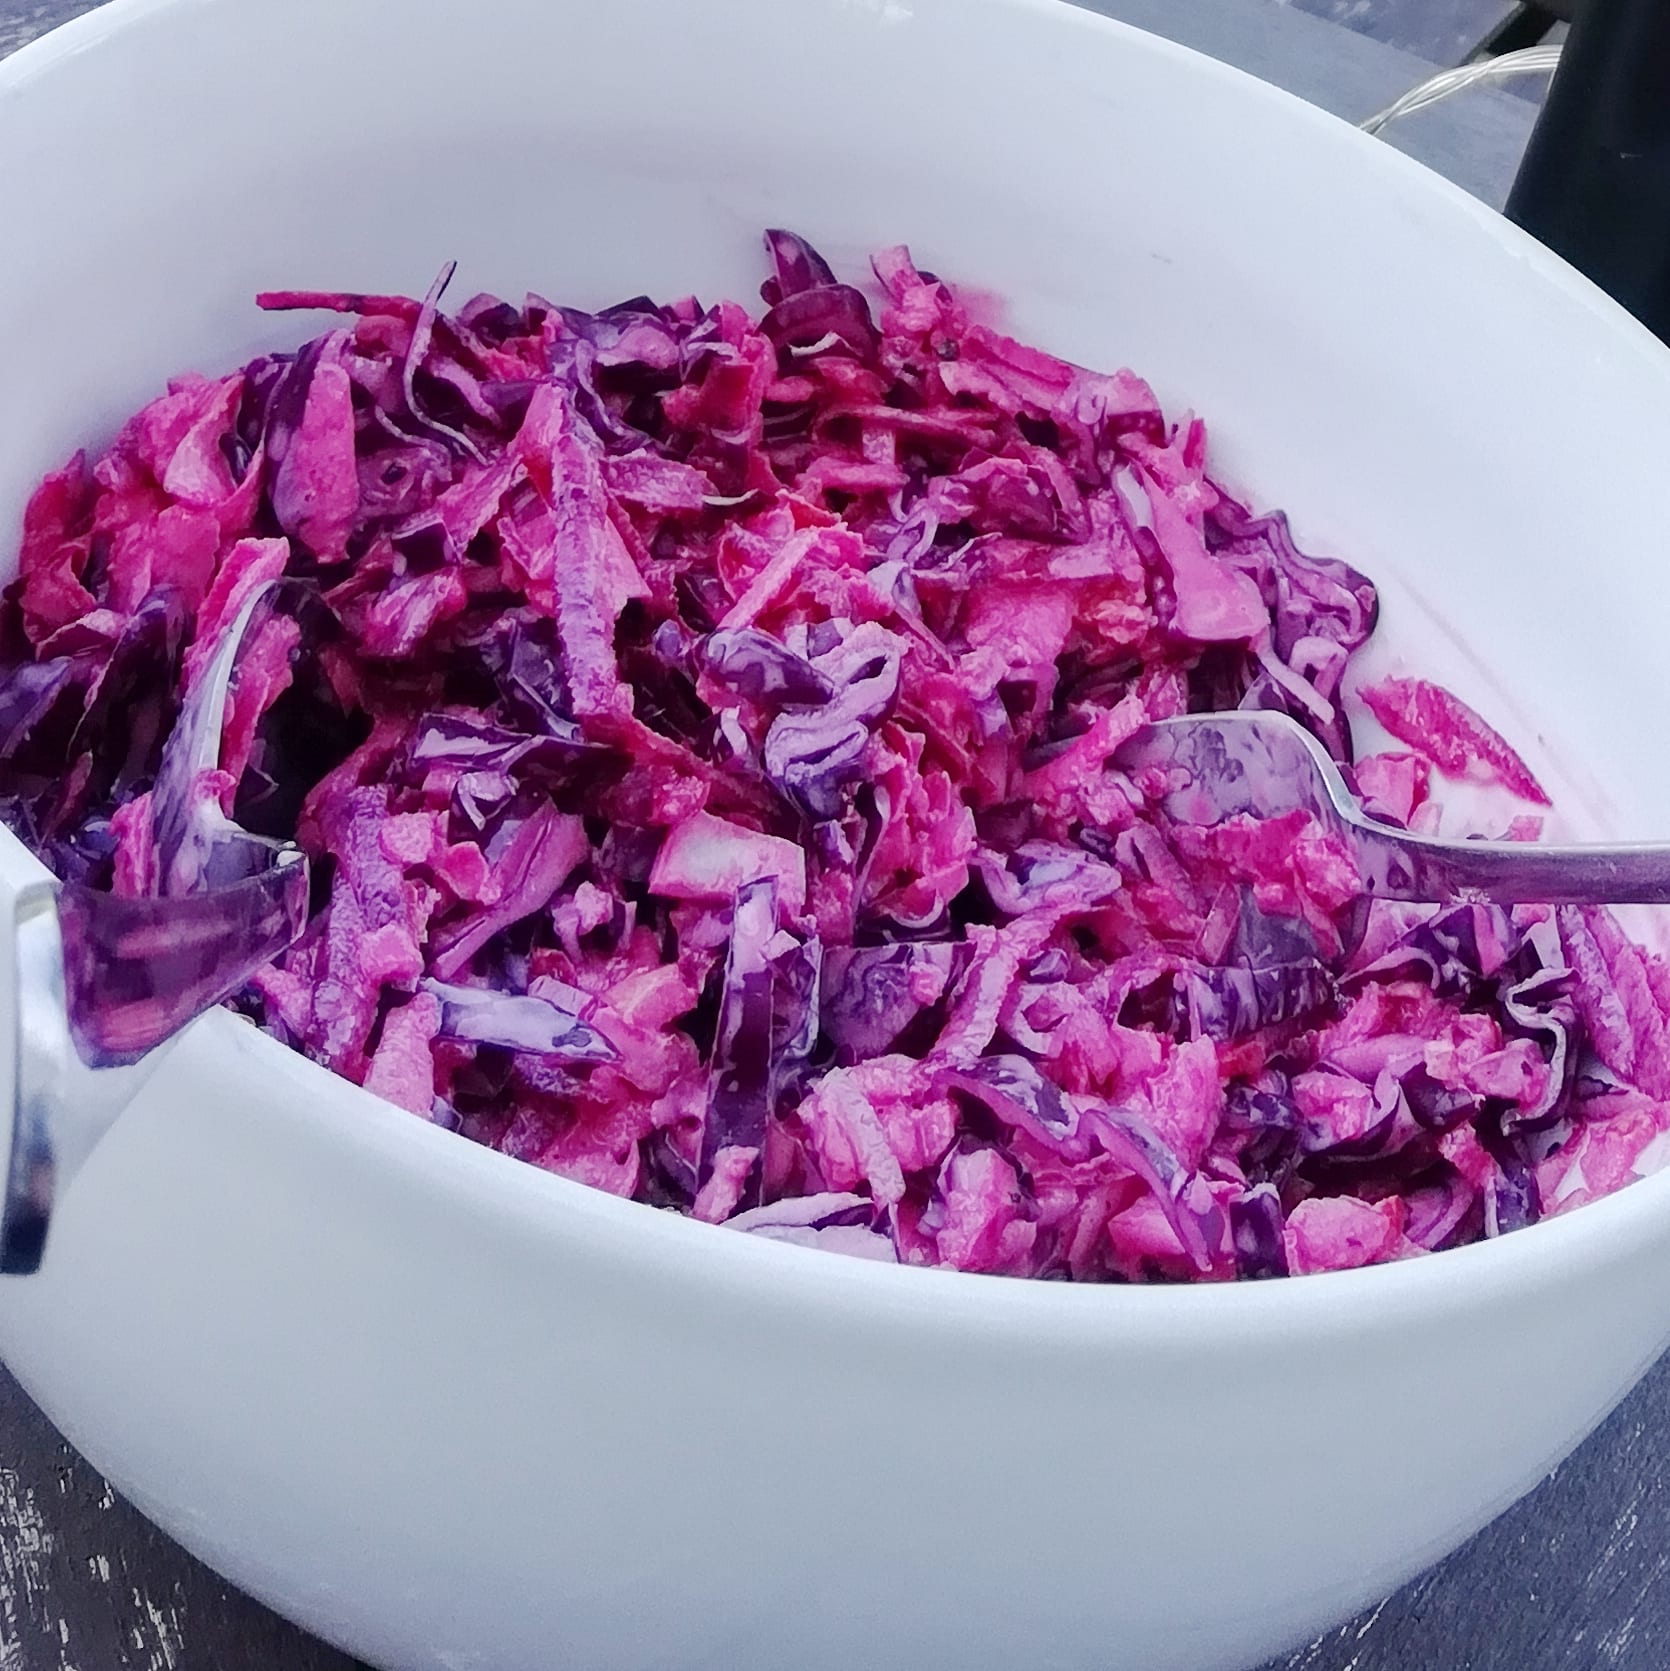 white bowl with pink coleslaw and serving implements